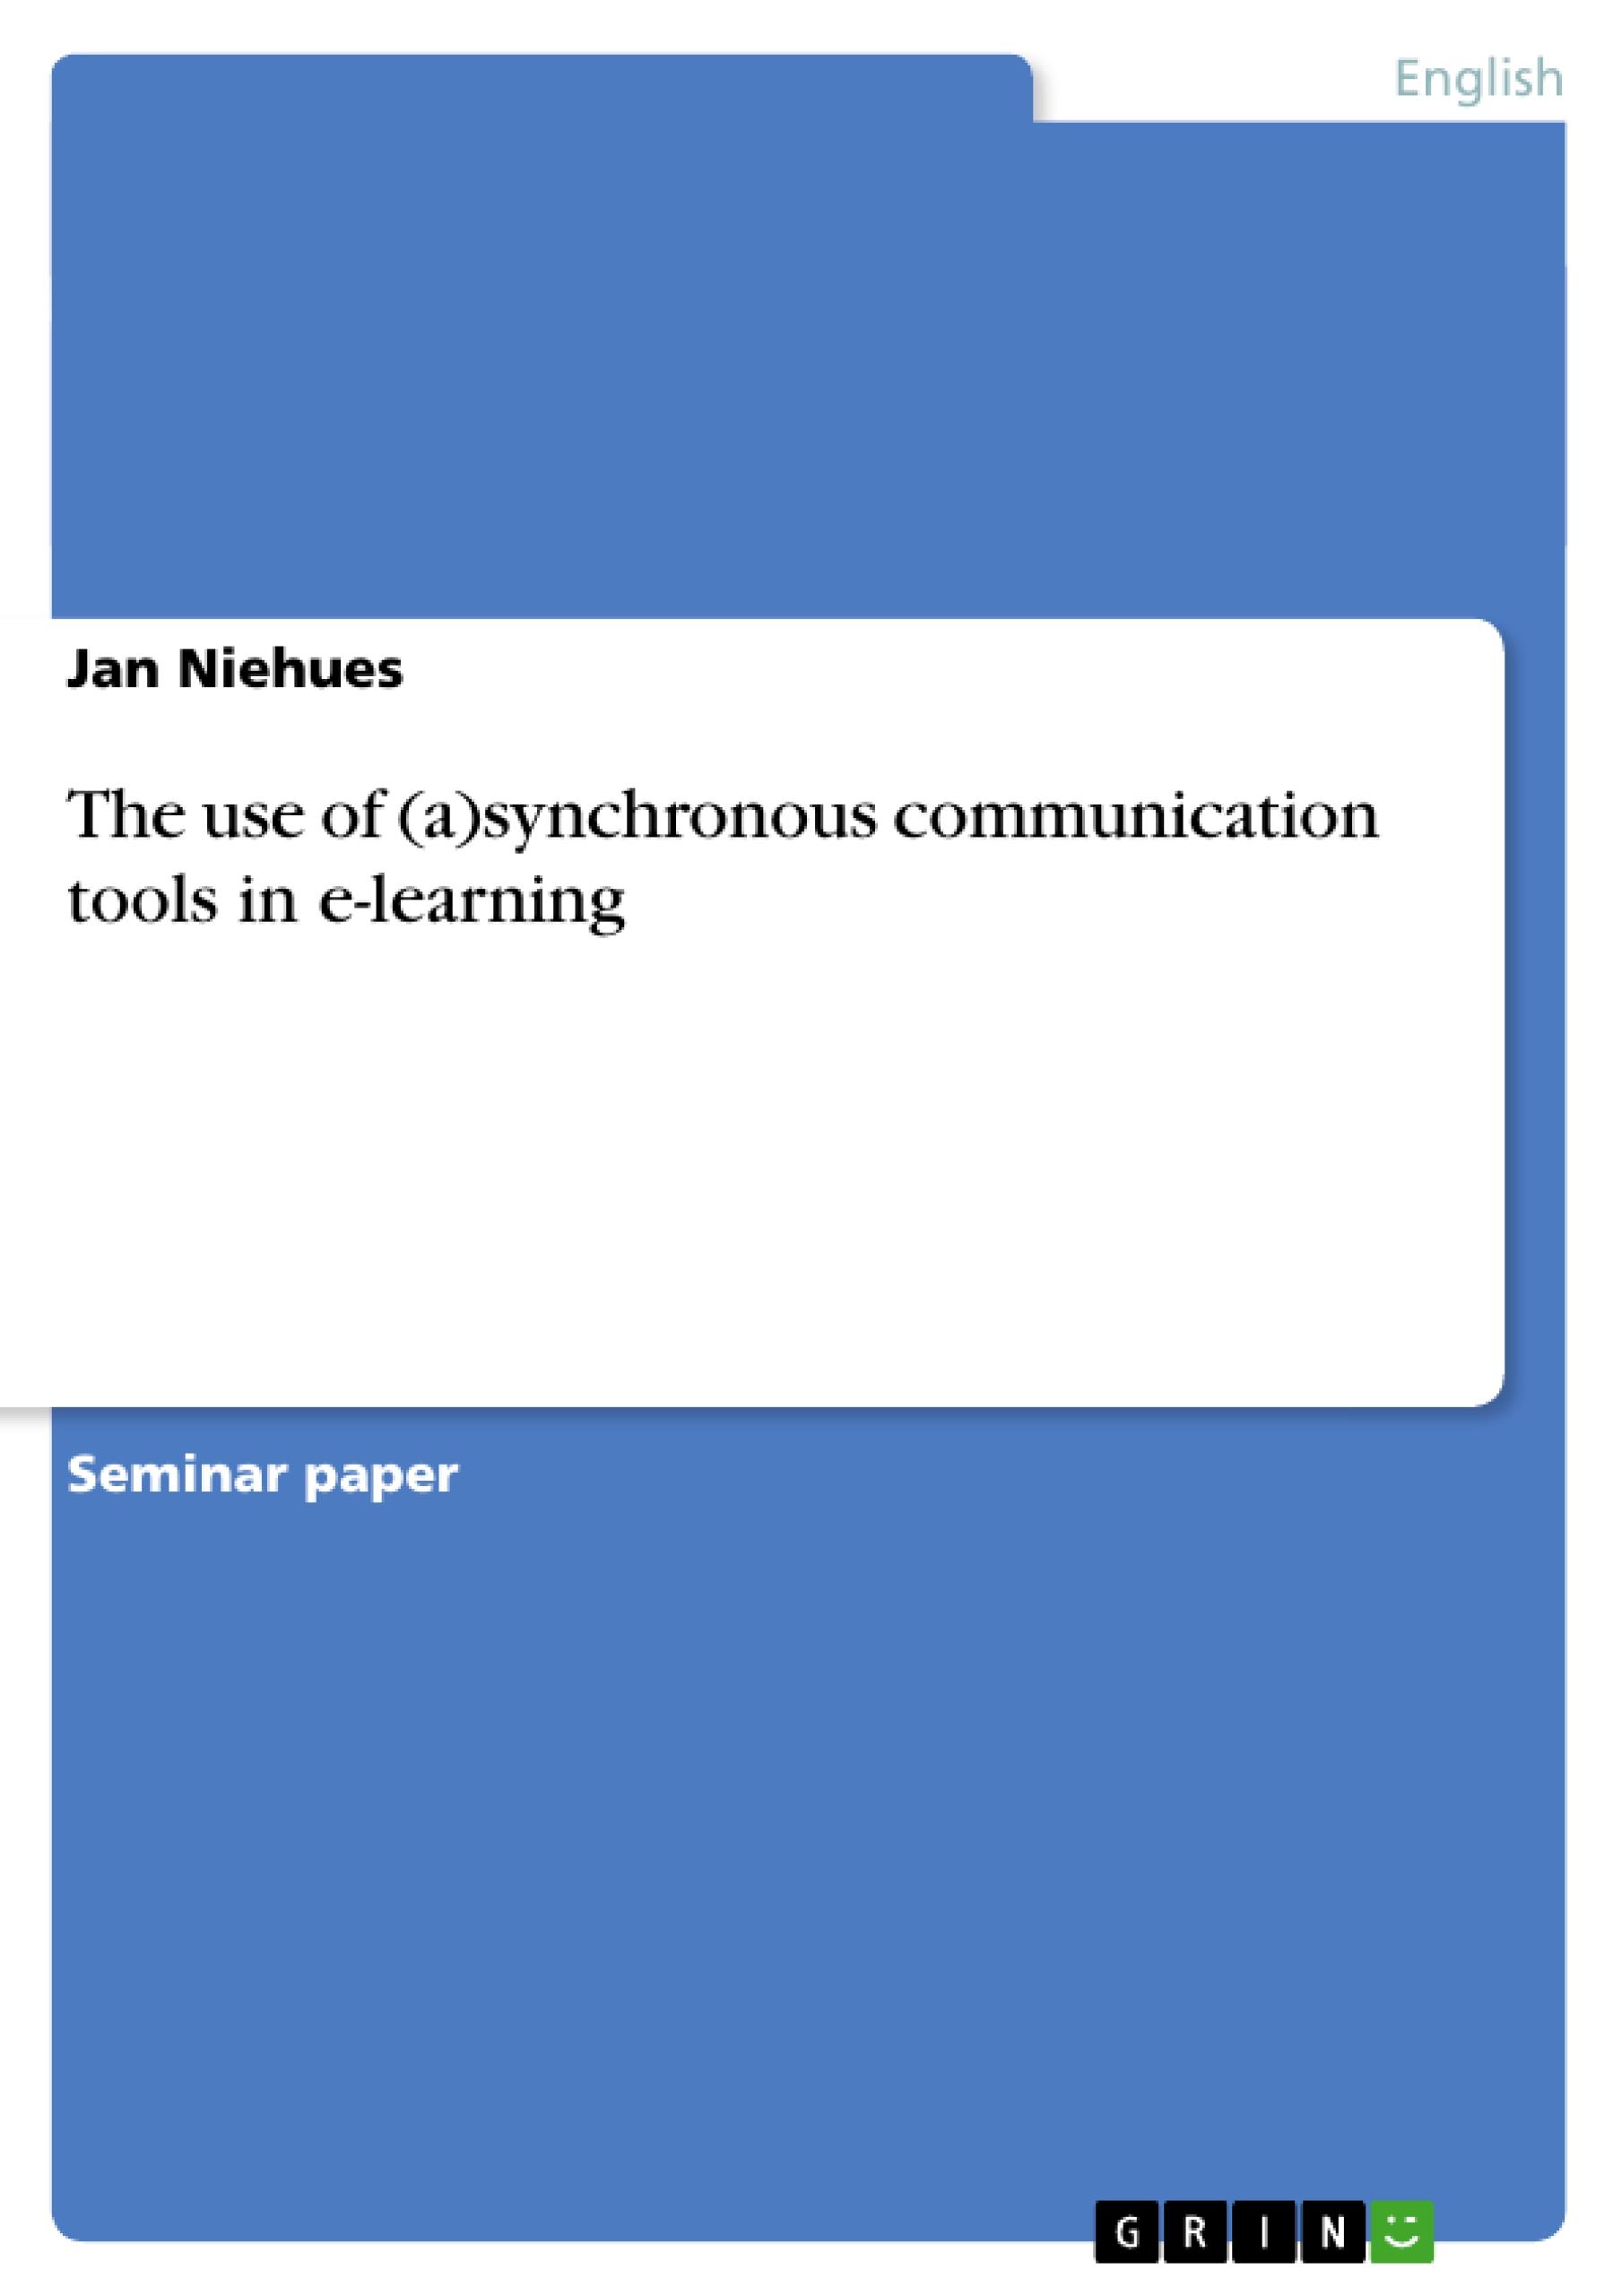 The use of (a)synchronous communication tools in e-learning | Jan Niehues | Taschenbuch | Booklet | Englisch | GRIN Verlag | EAN 9783638813686 - Niehues, Jan